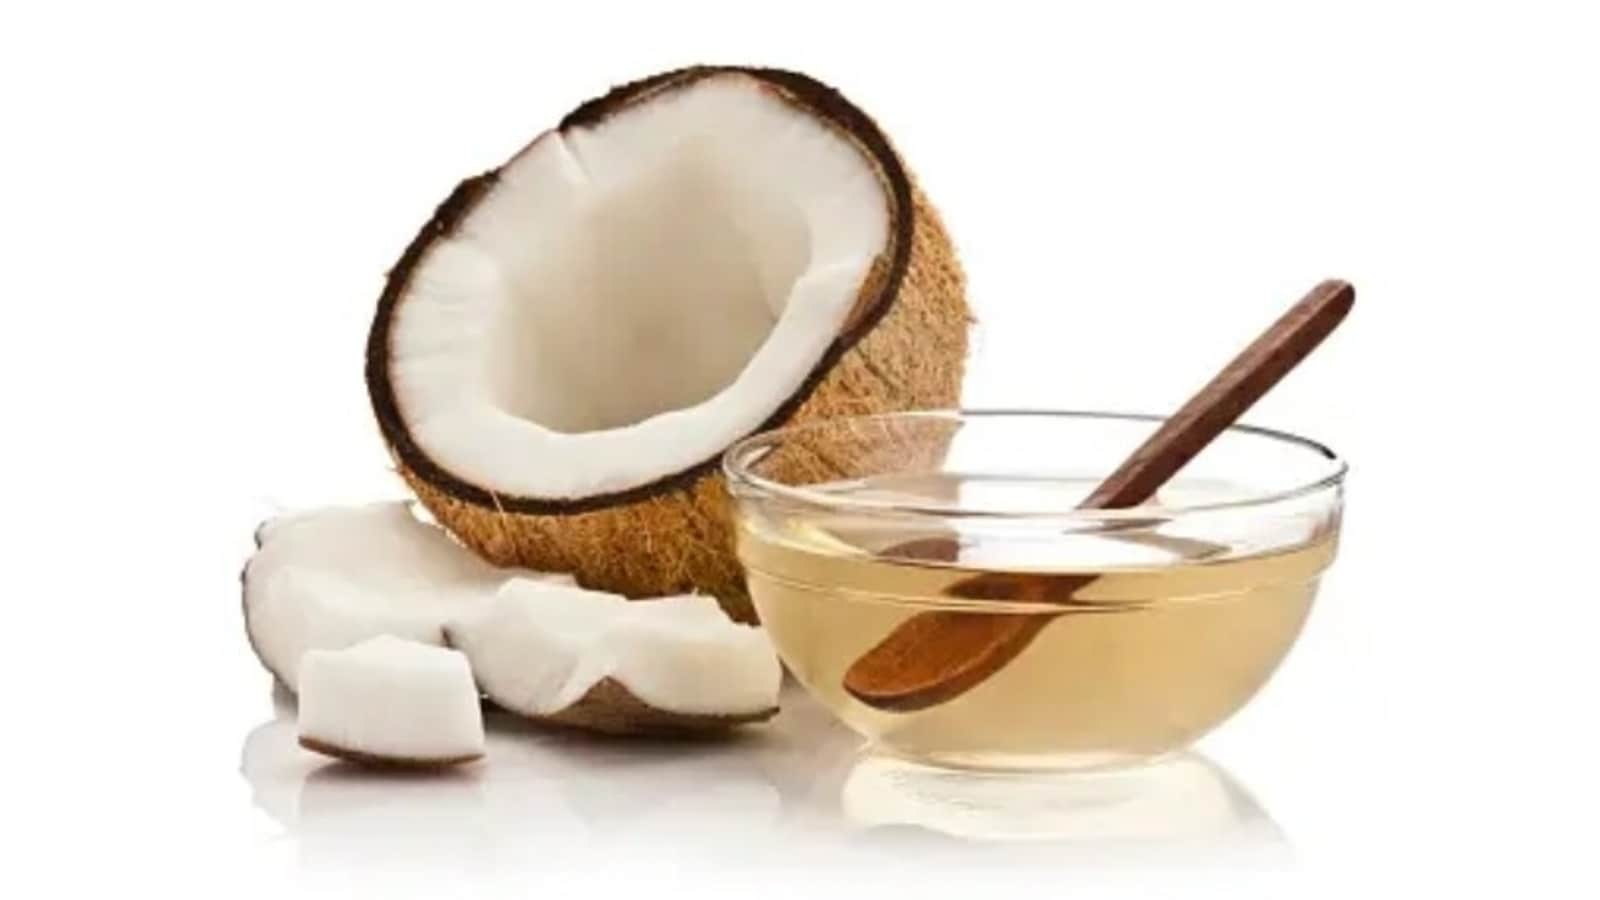 Health benefits of coconut oil we should be aware of